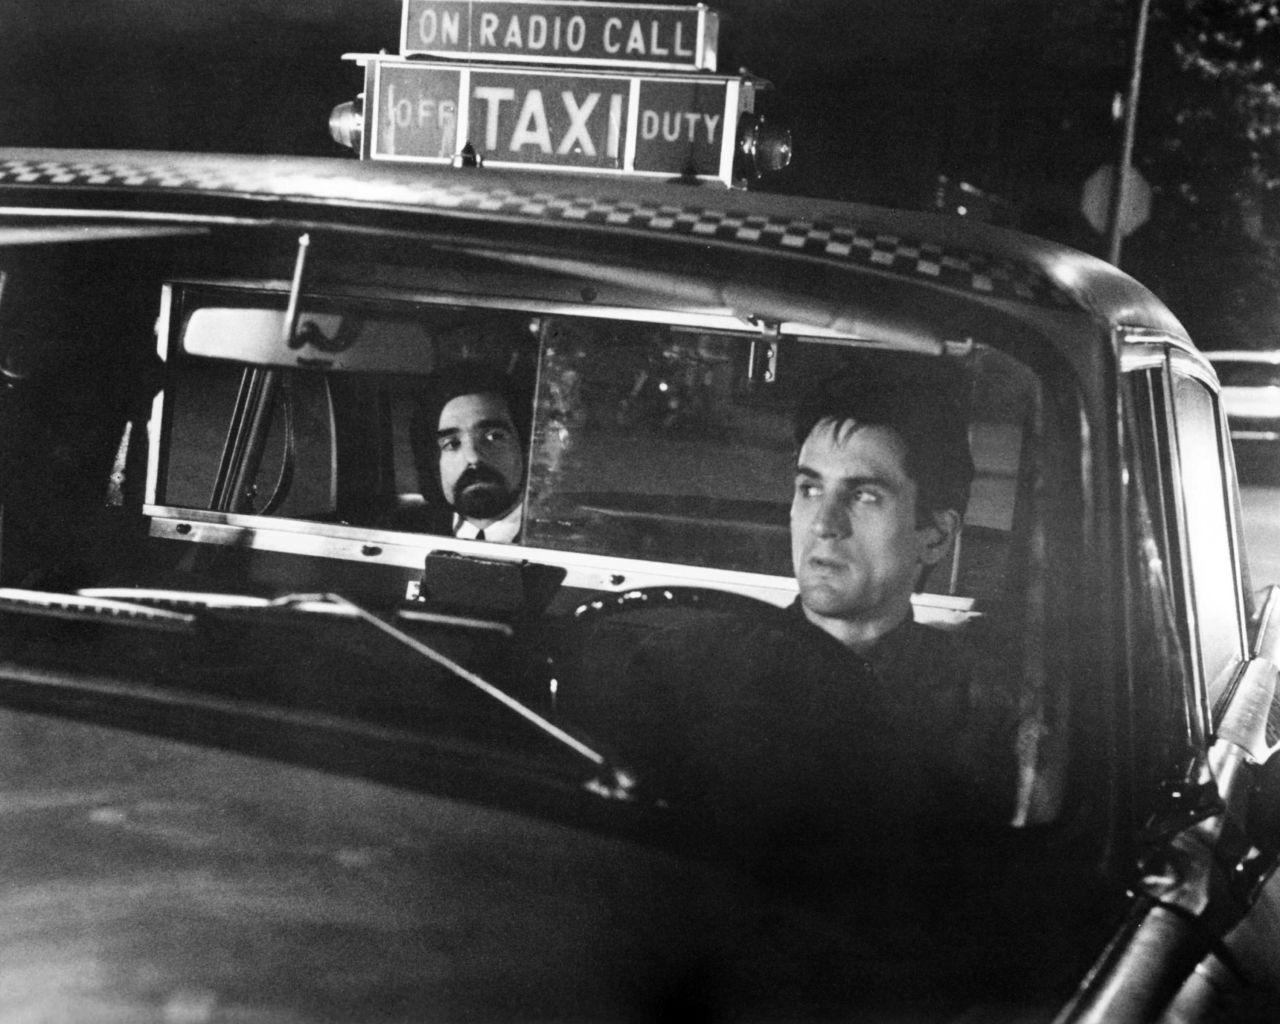 Scorsese rides in the back seat of a cab as he plays a role in his 1976 film "Taxi Driver." De Niro played the main character, Travis Bickle.